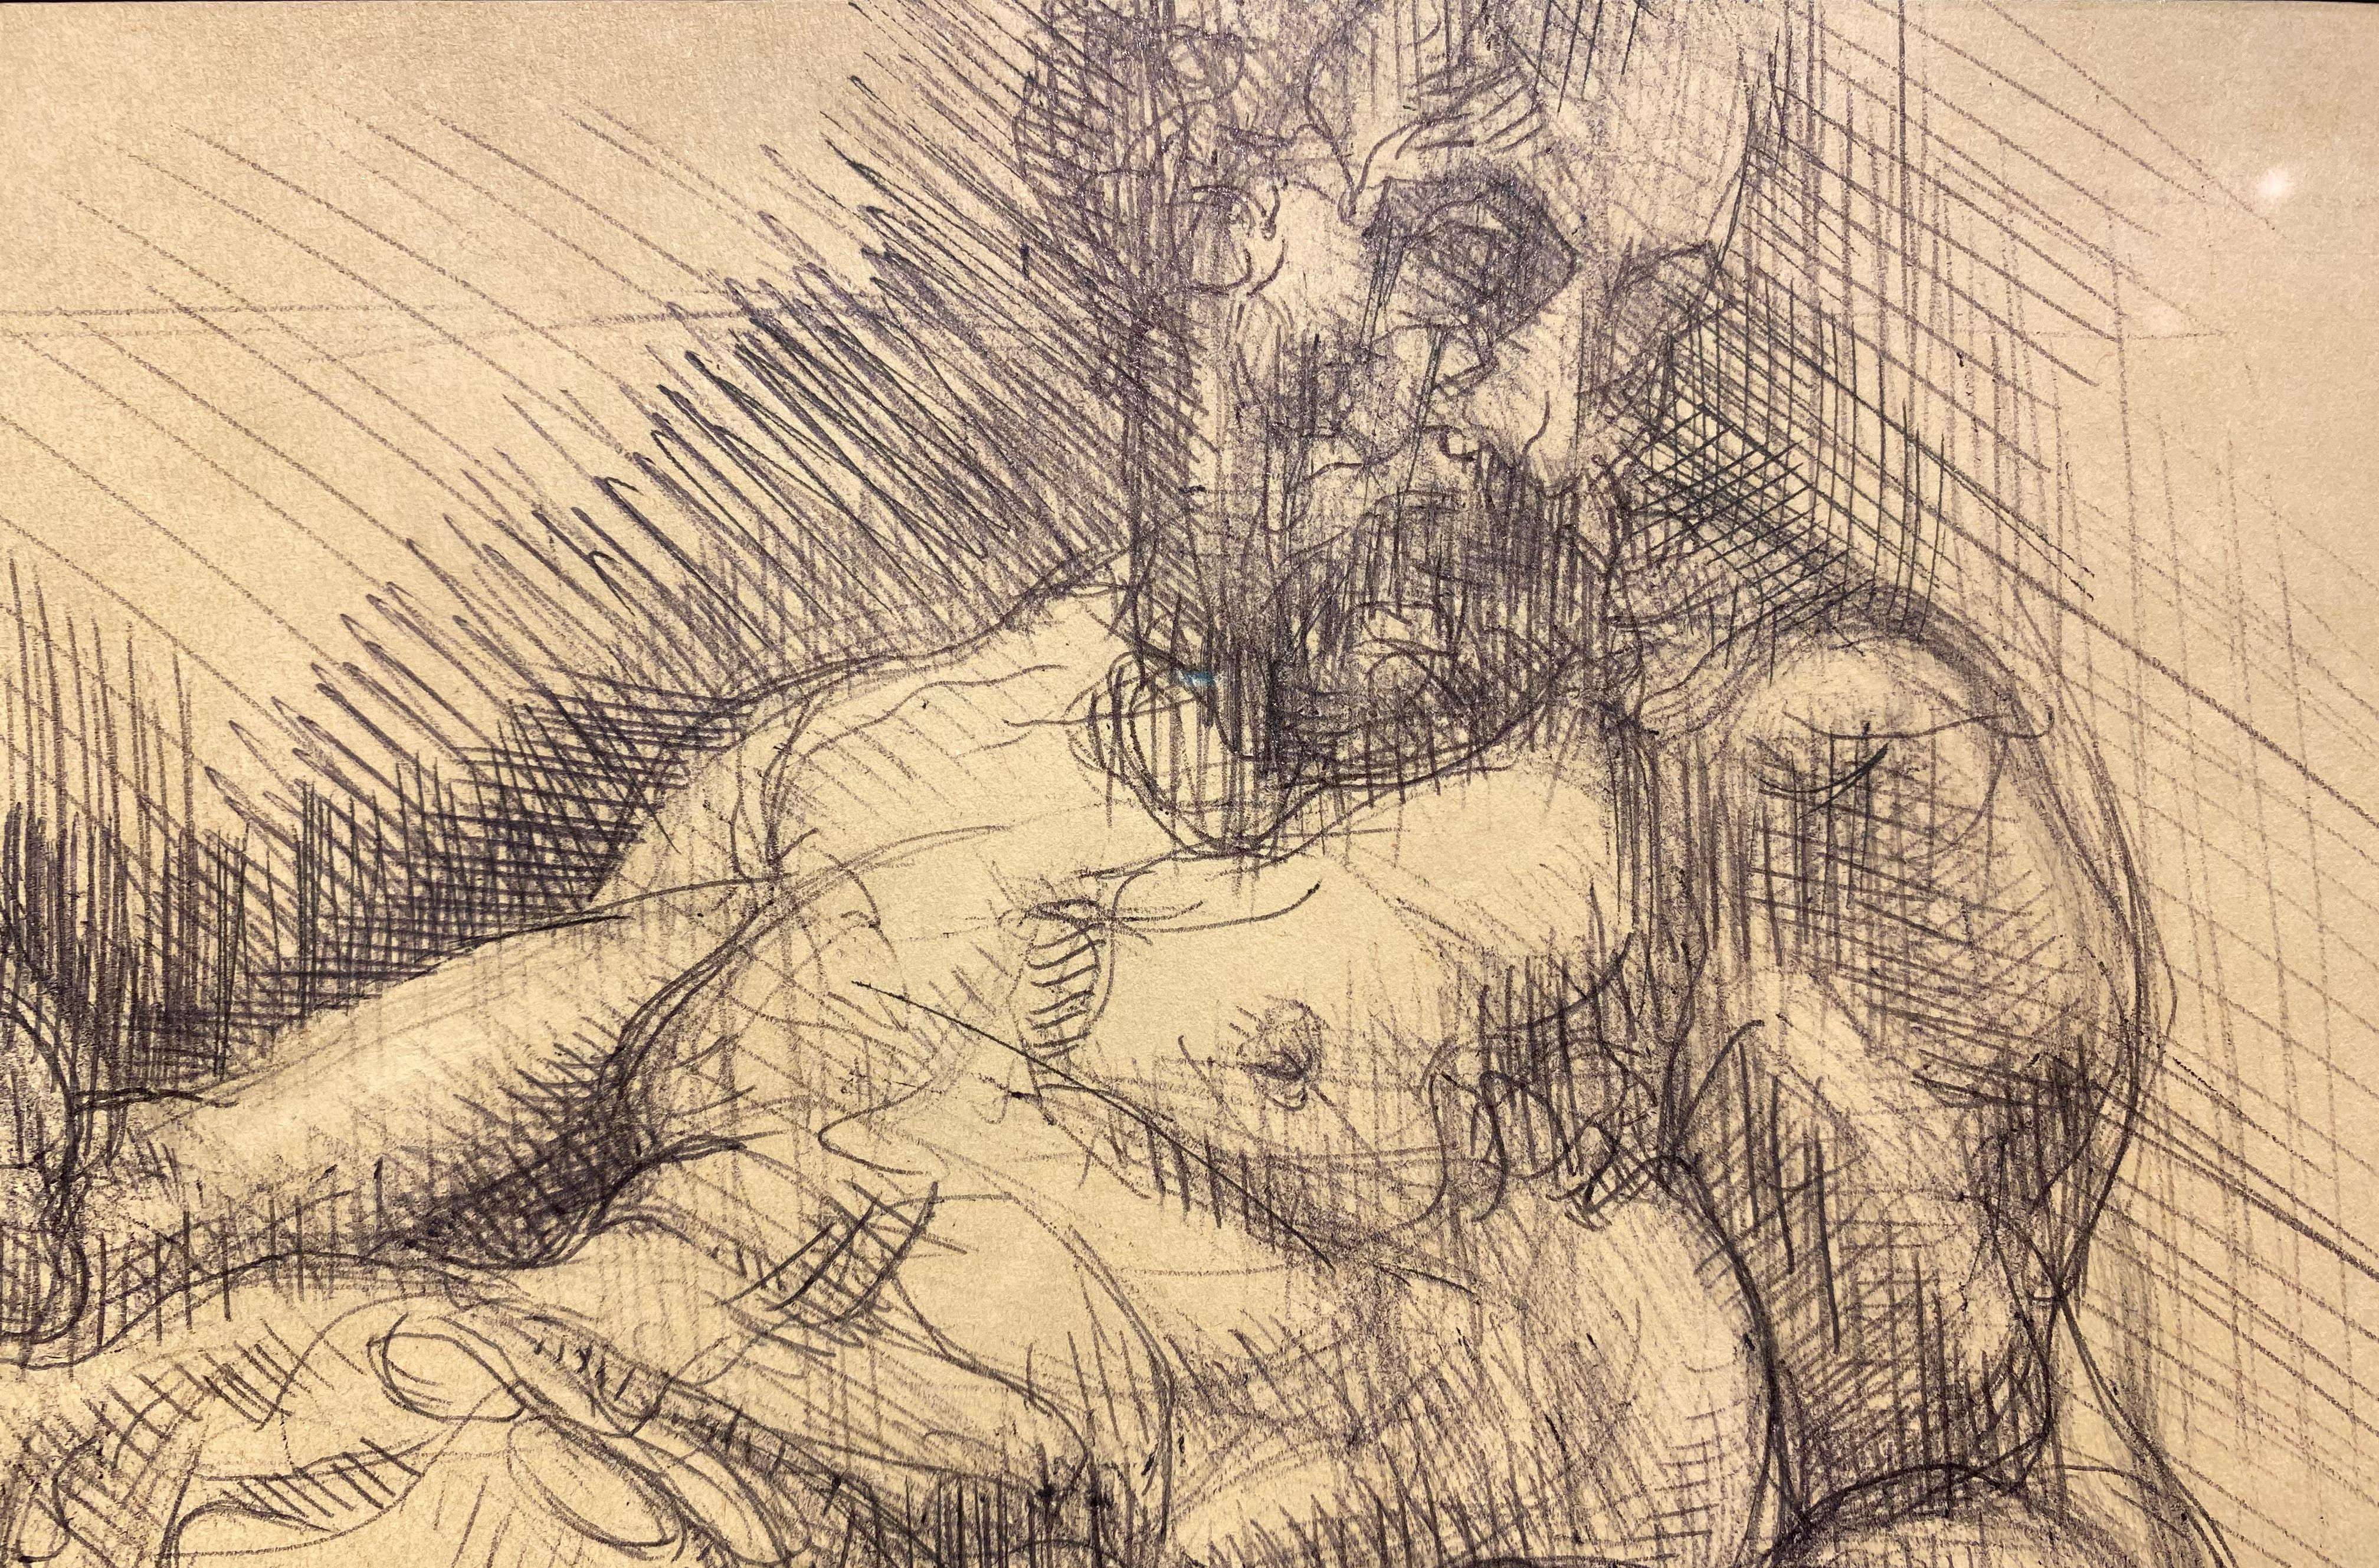 
This particular drawing is a study of the sculpture at the Medici Chapel in Florence, Italy.  The artist creates a true to life representation of the sculpture in question by incorporating techniques of classical academic drawing such as cross